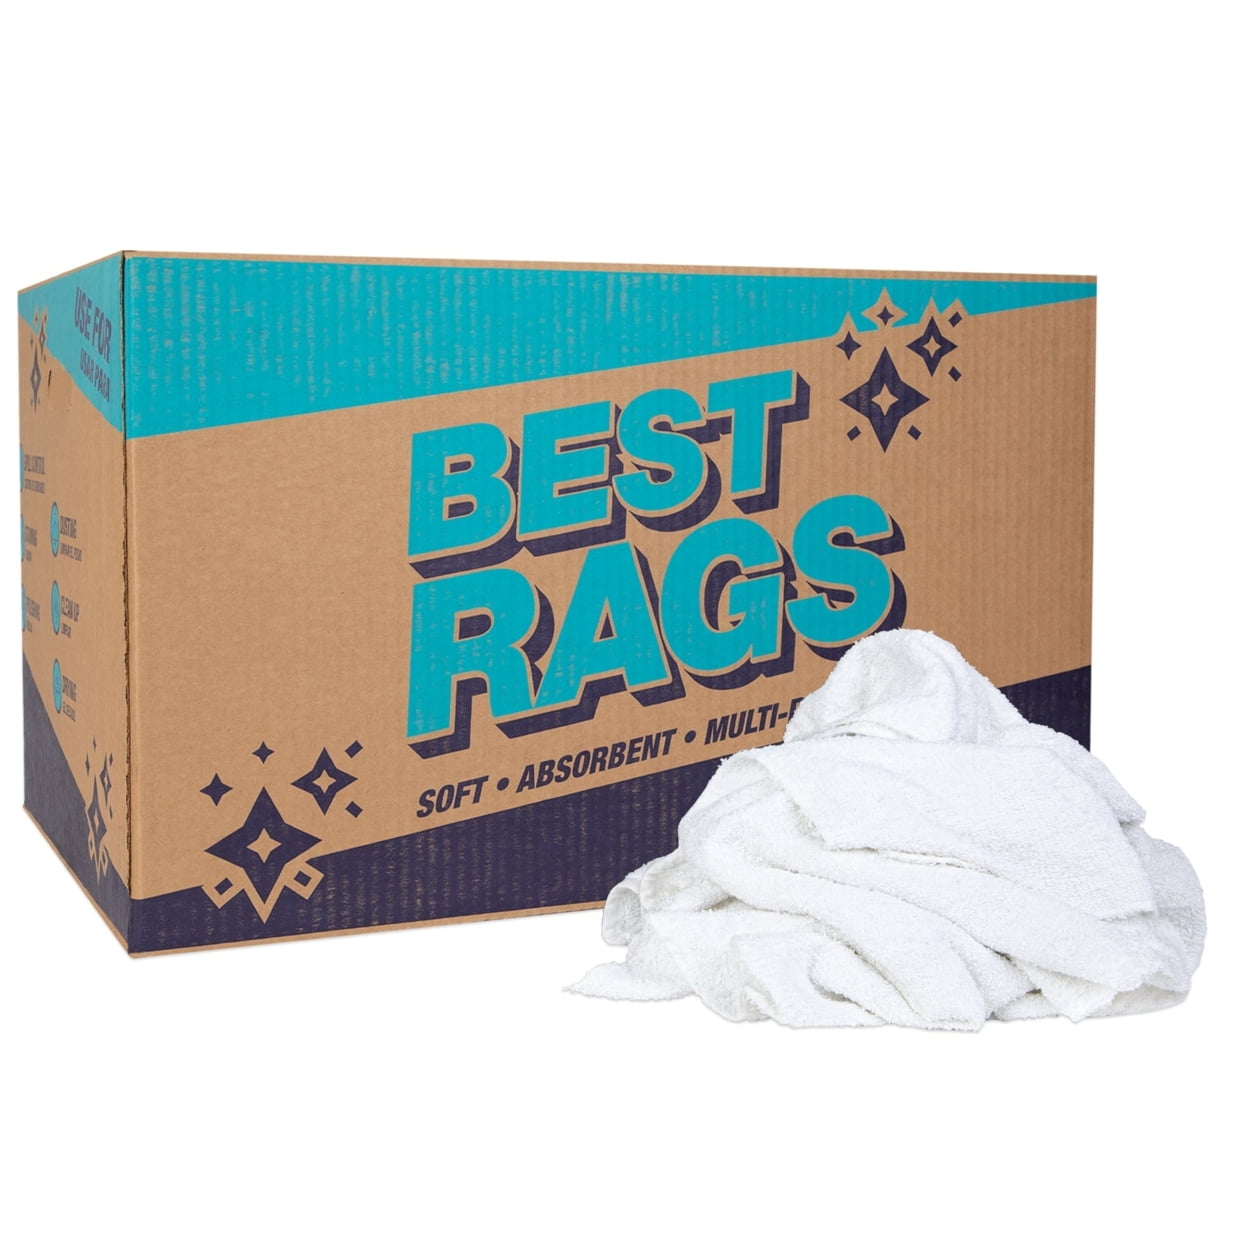 Arkwright White Terry Cloth Rags (50lb Box), Large Size - 20x20 to 24x24,  Bulk Rags for Multipurpose Cleaning